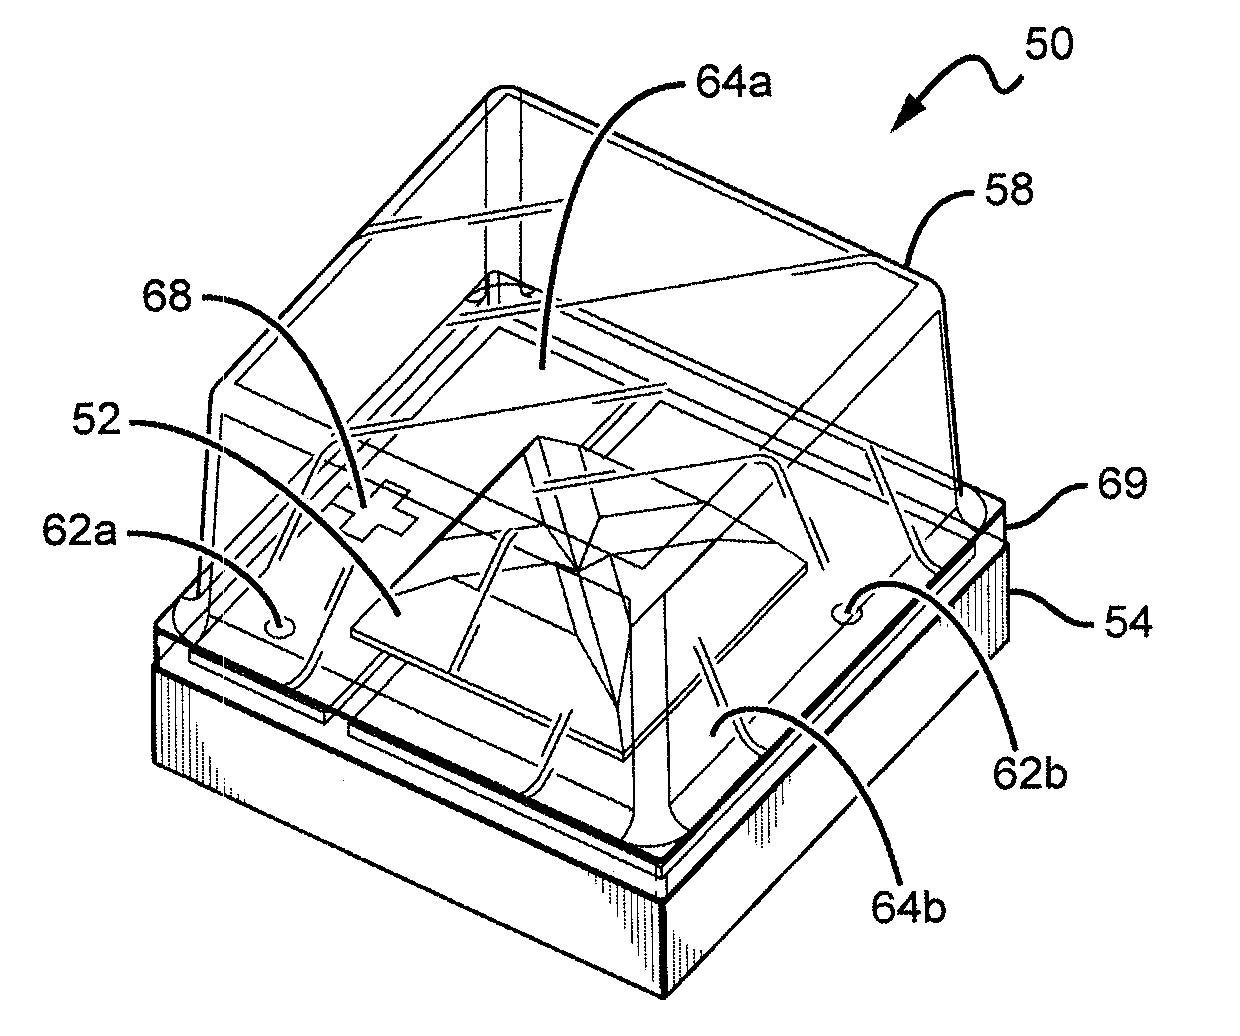 LED package with encapsulant having planar surfaces